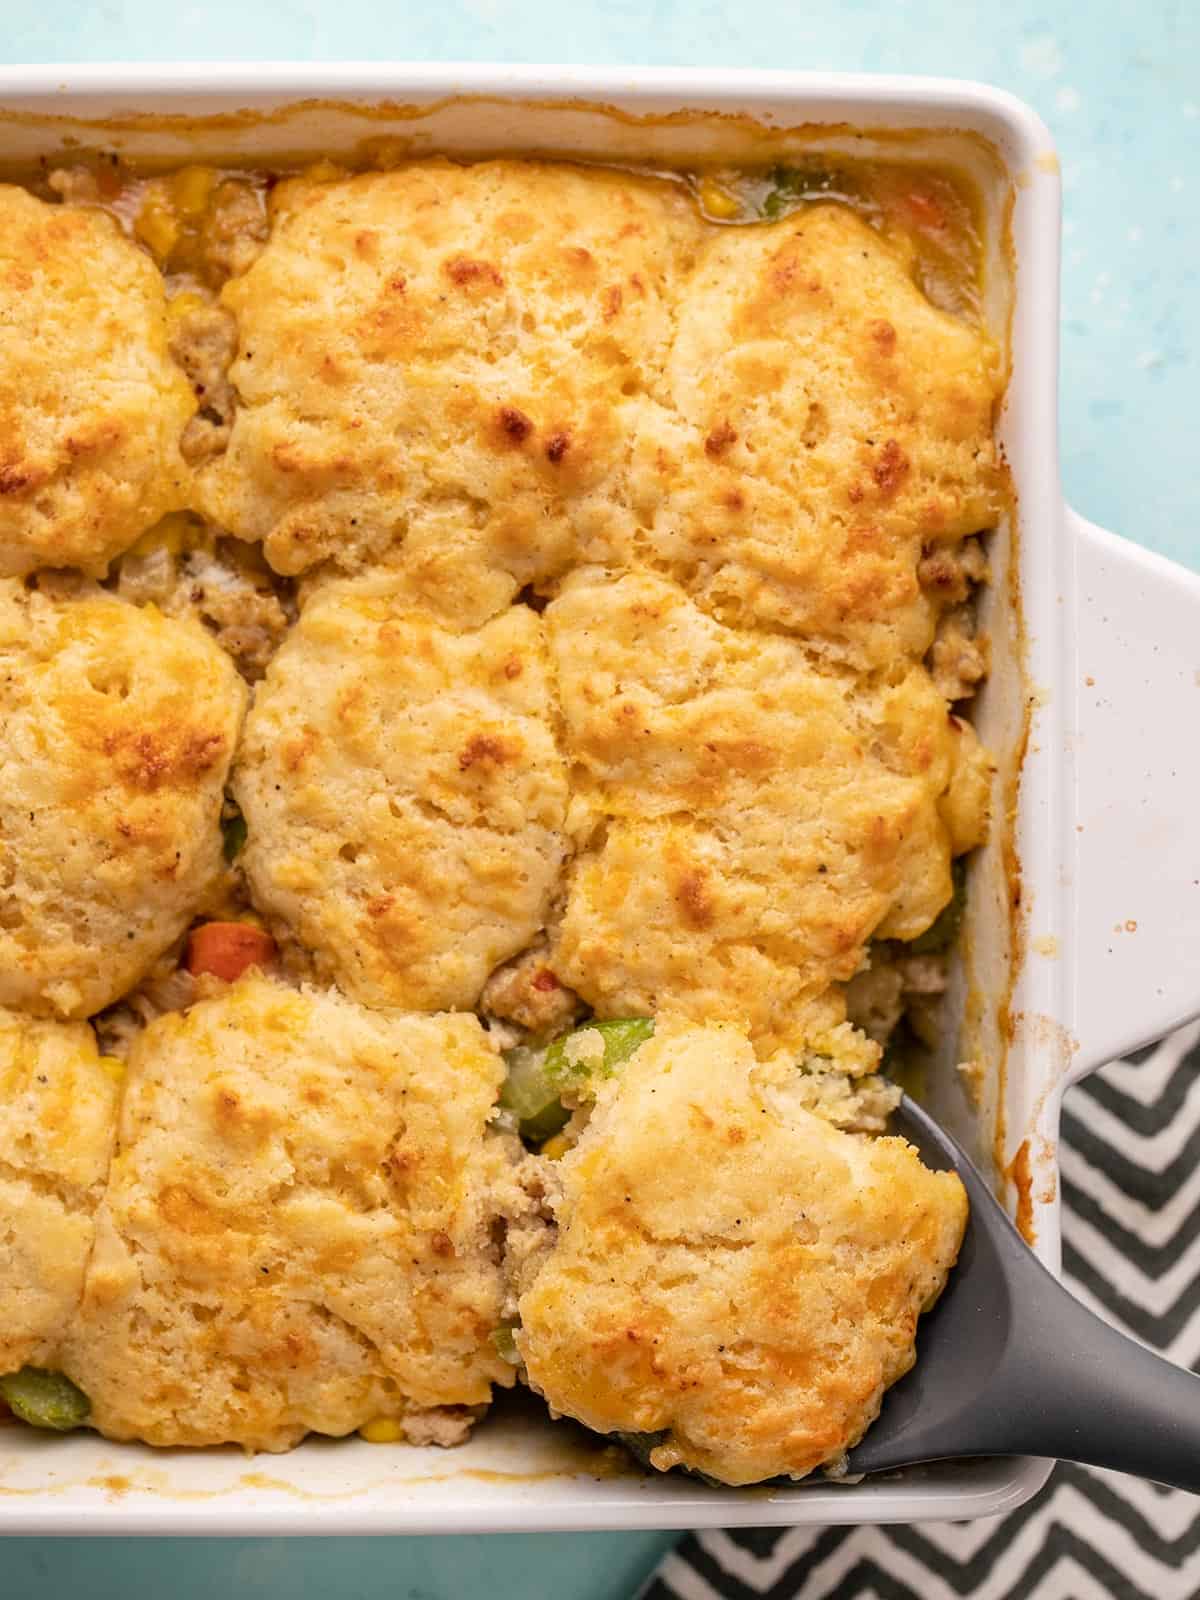 Overhead view of cooked chicken and biscuit casserole with a serving spoon